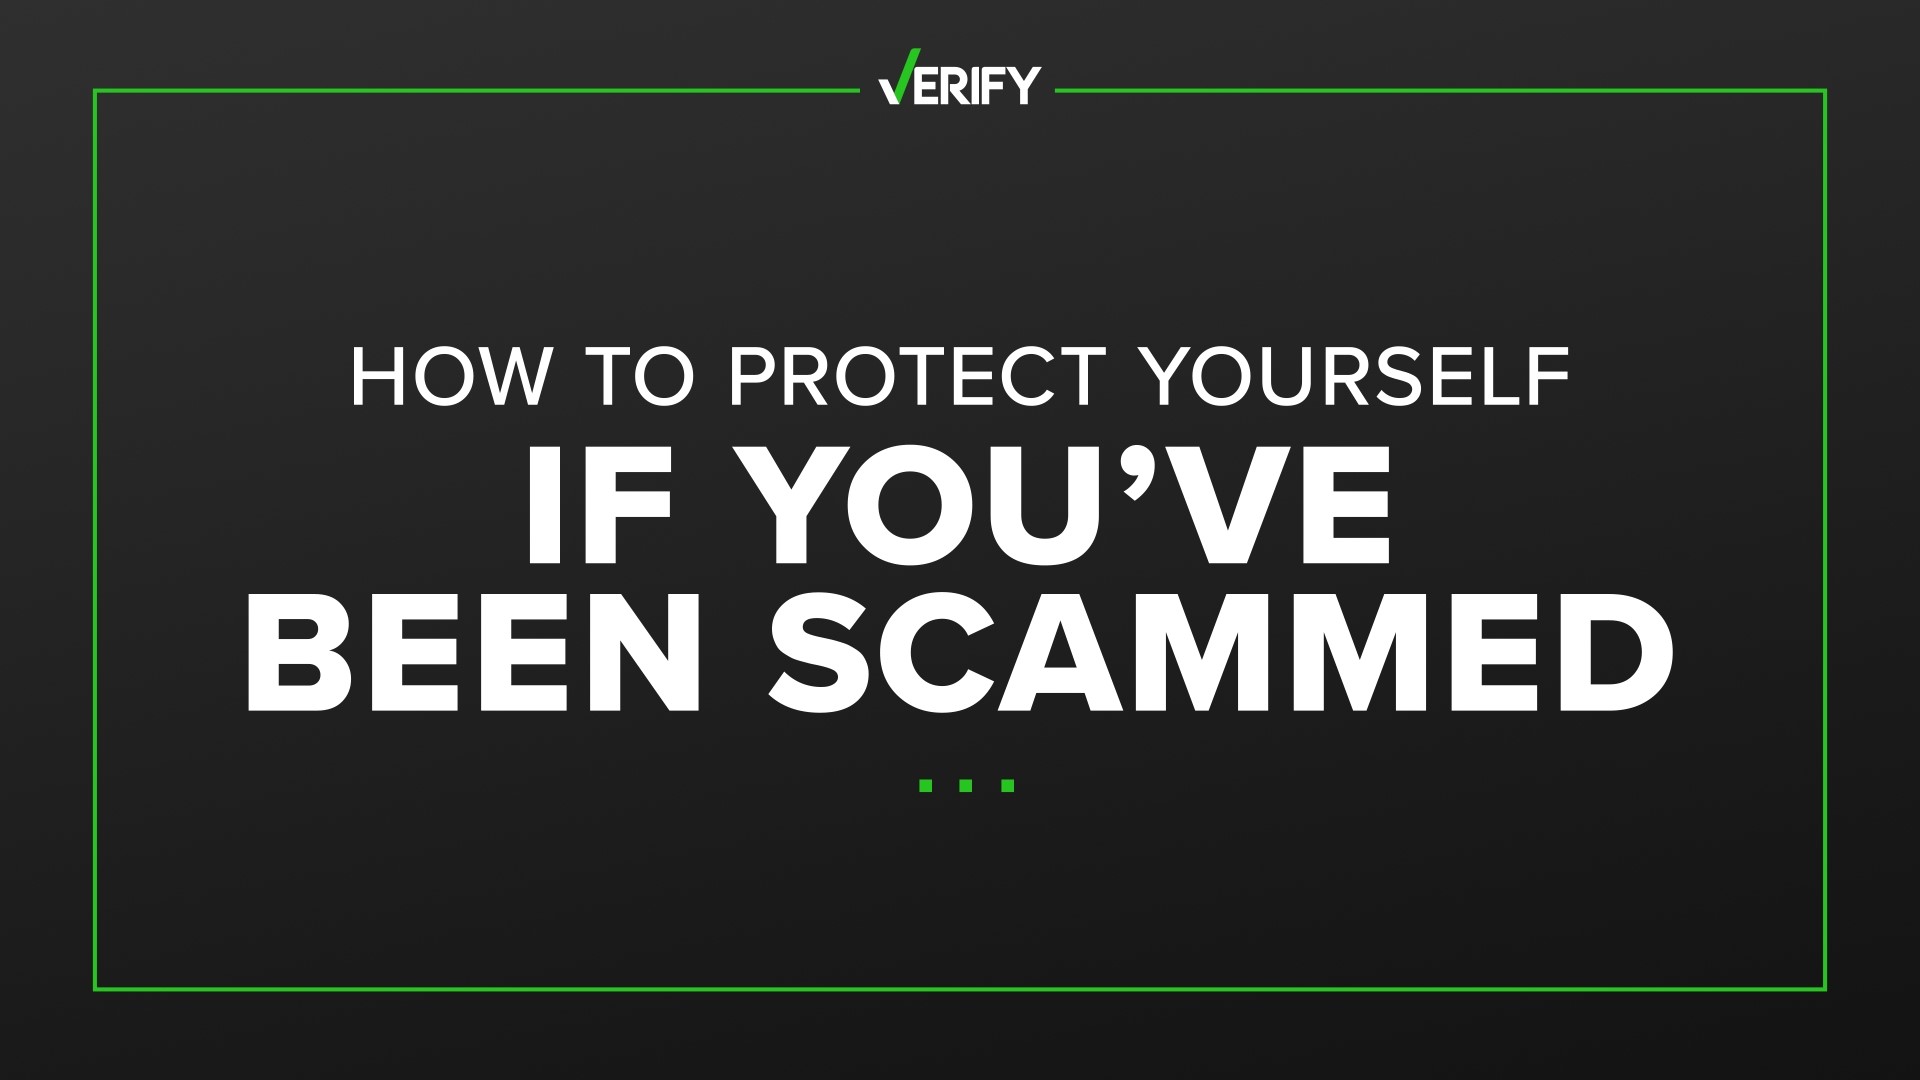 Scammers can call, email or send text messages to get money or personal information. If you gave them your credit card, bank, or other info, here is how to lock your